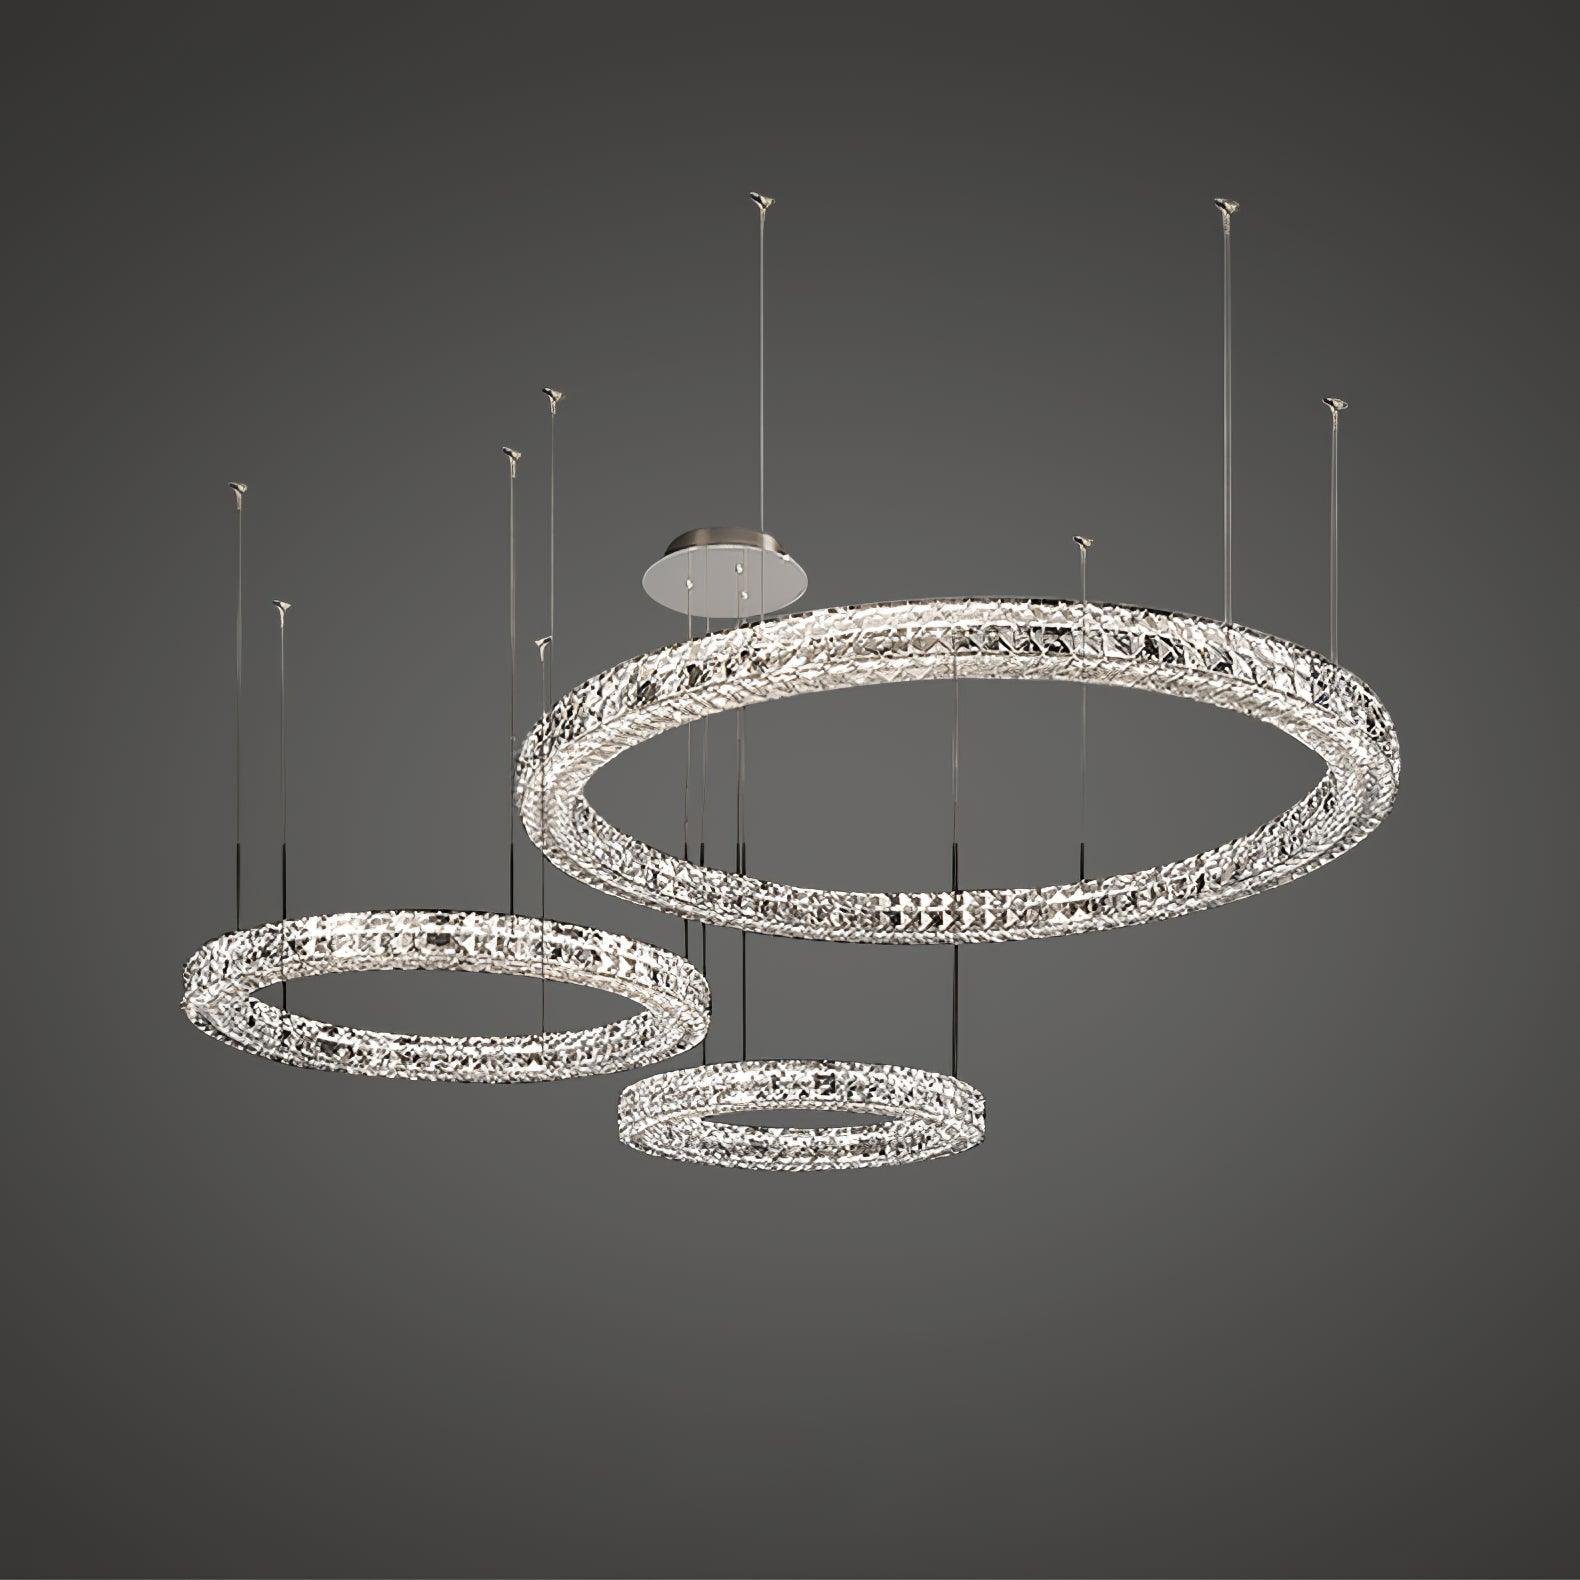 Silver Spiridon Chandelier in Different Sizes and Heights (Diameter 15.7", 23.6", 31.5" x Height 59", Diameter 40cm, 60cm, 80cm x Height 150cm) with Cool White Lighting